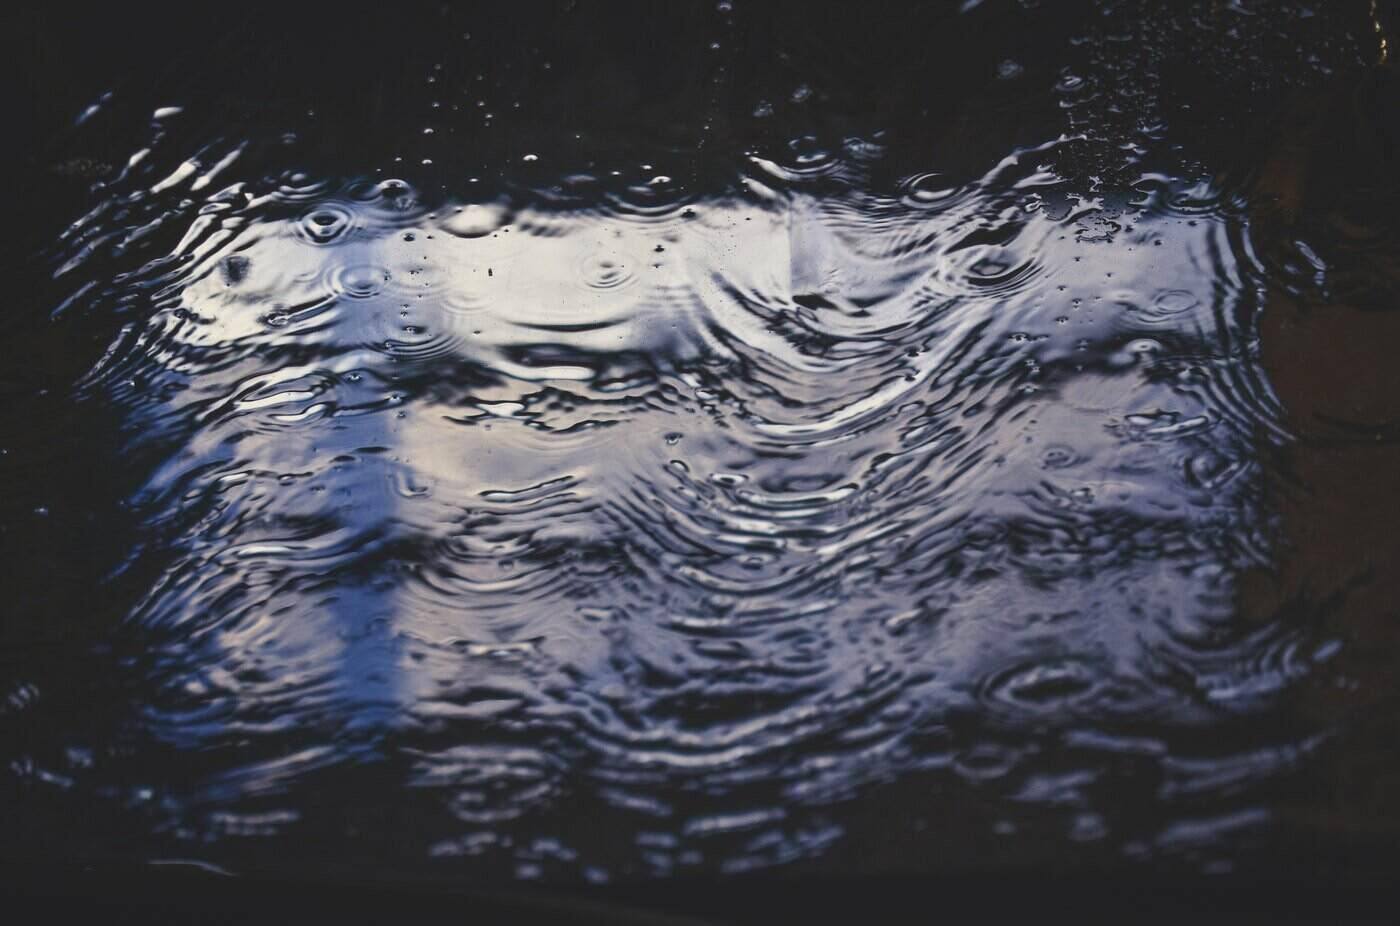 water with reflection of window - fix the problems with your crawl space